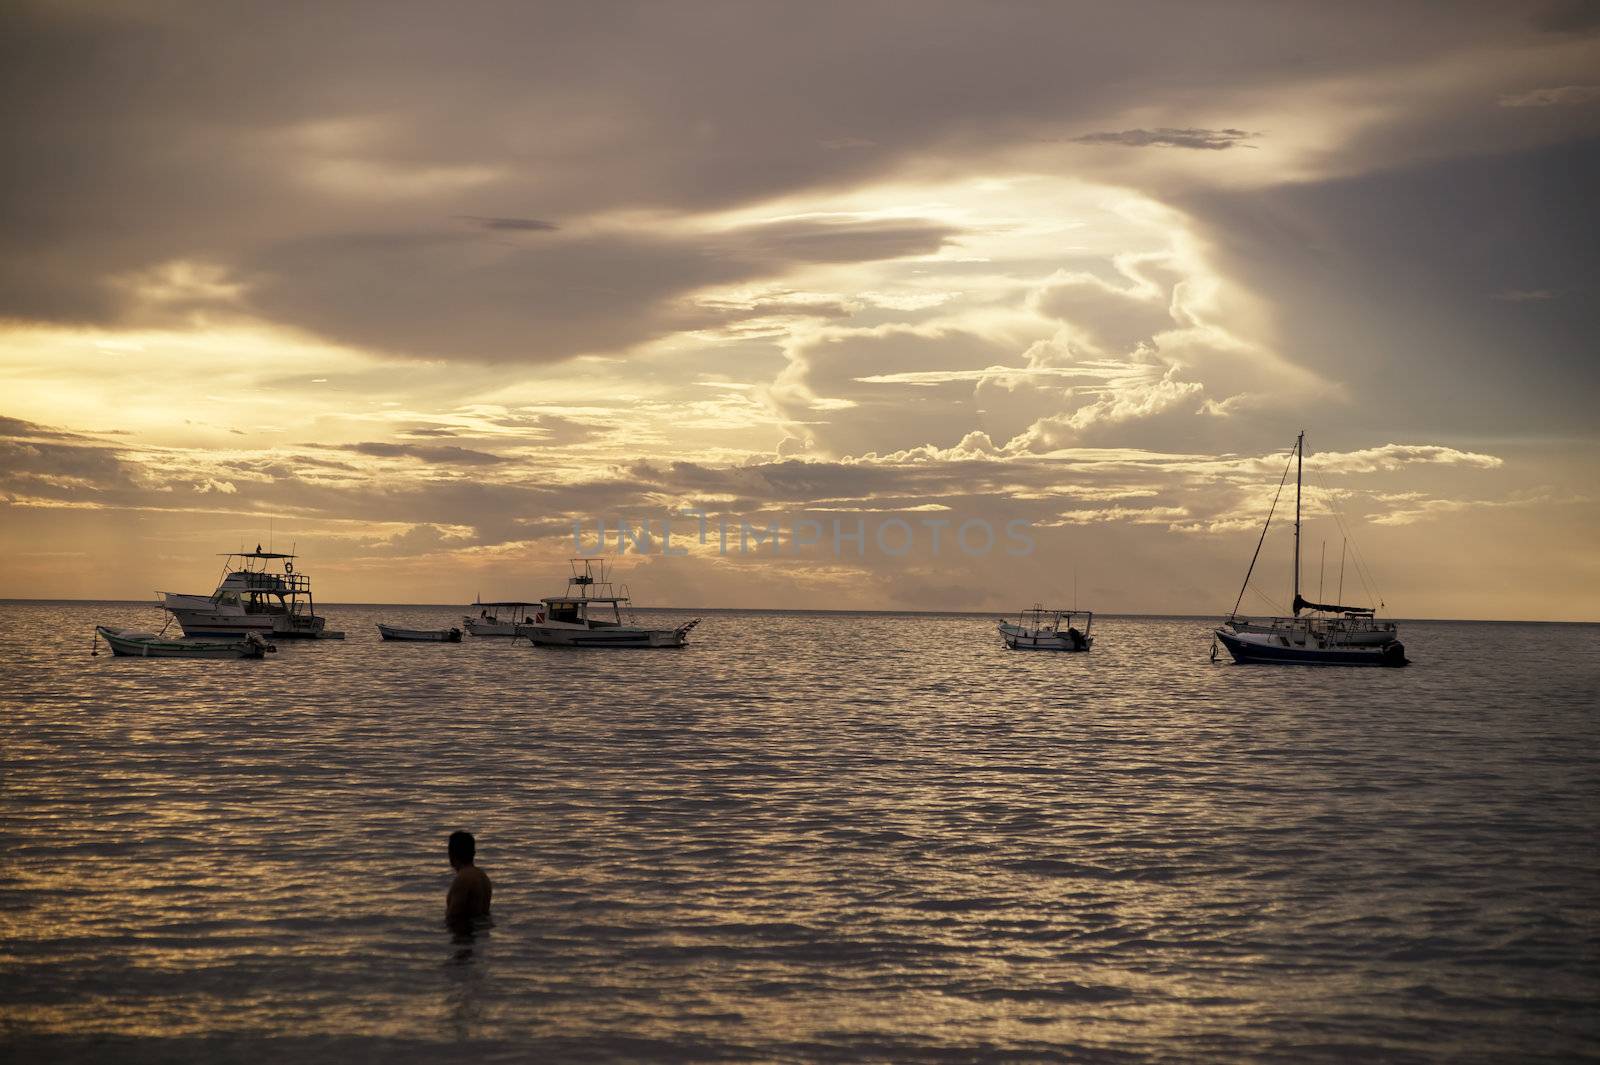 Costa Rica sunset with Boats and single bather in the Pacific Ocean